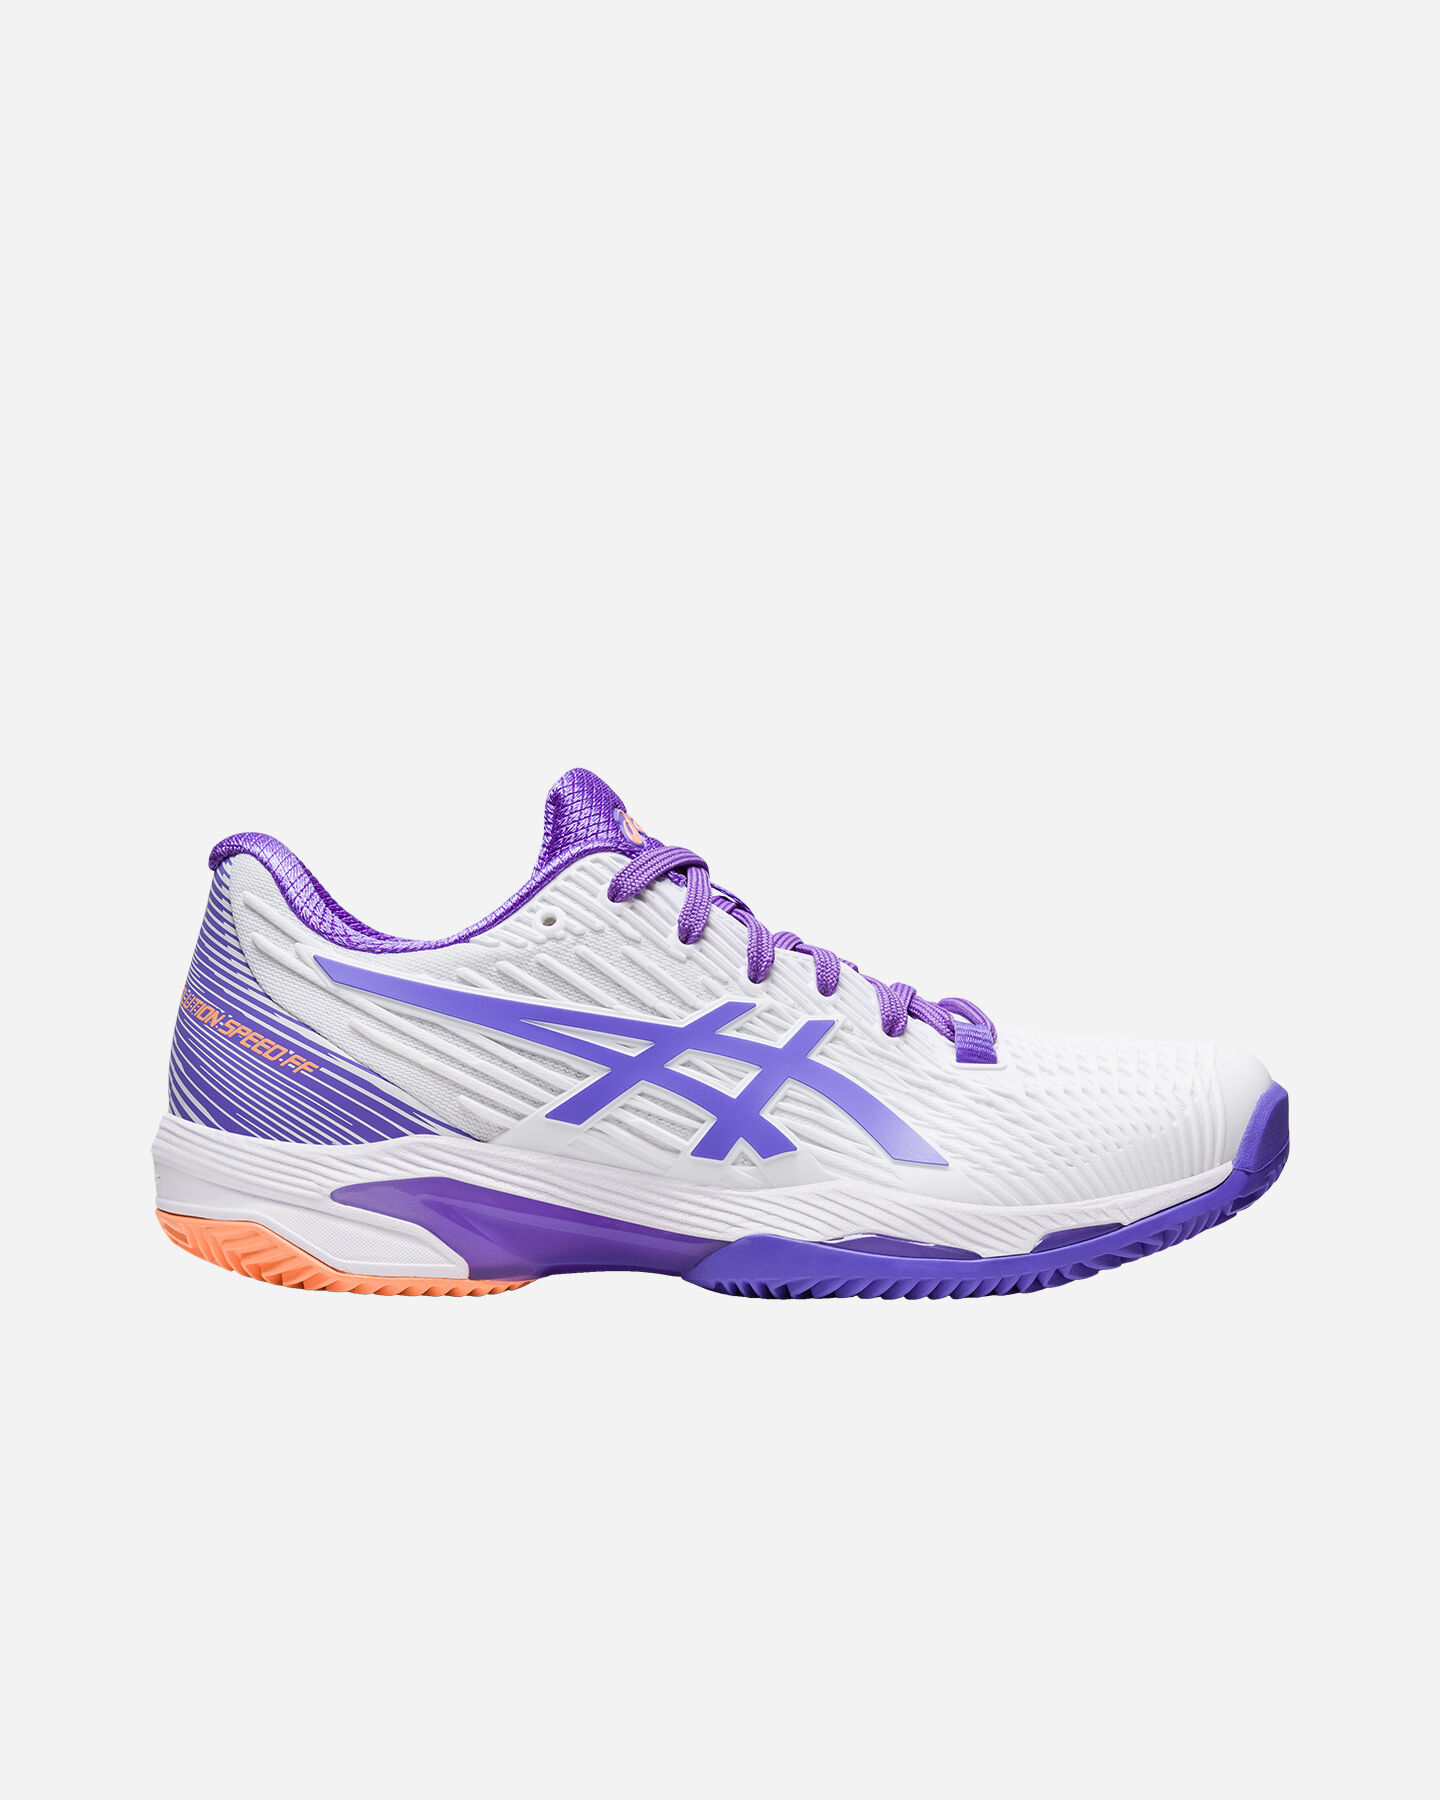  Scarpe tennis ASICS SOLUTION SPEED FF 2 CLAY W S5526076|104|6 scatto 0